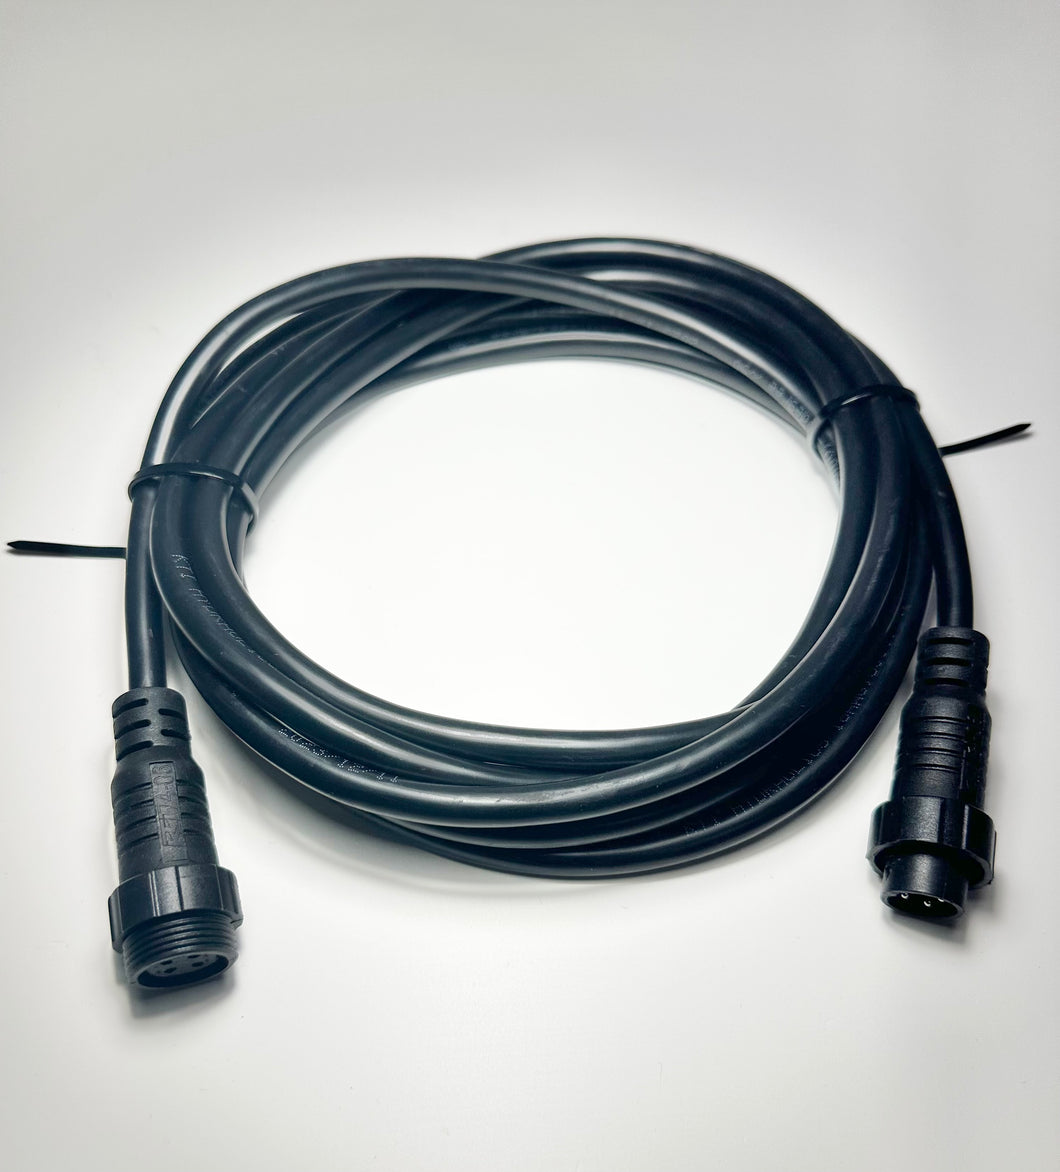 74-06 15 FT Cord